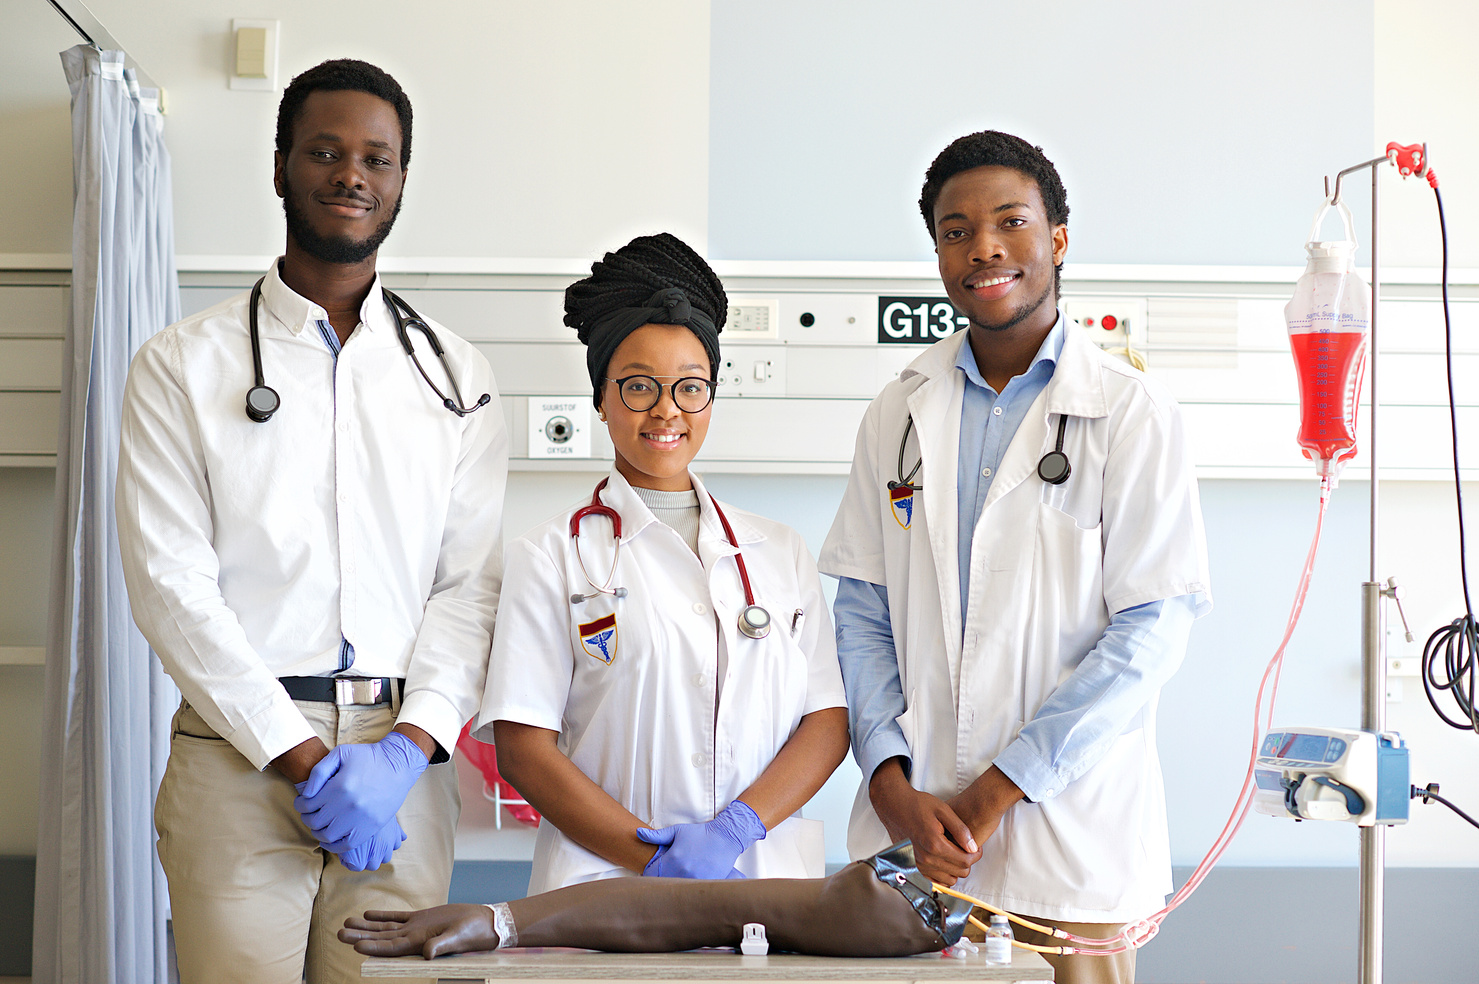 Portrait of Students practising IV injection on a Phlebotomy Venipuncture Practise Arm